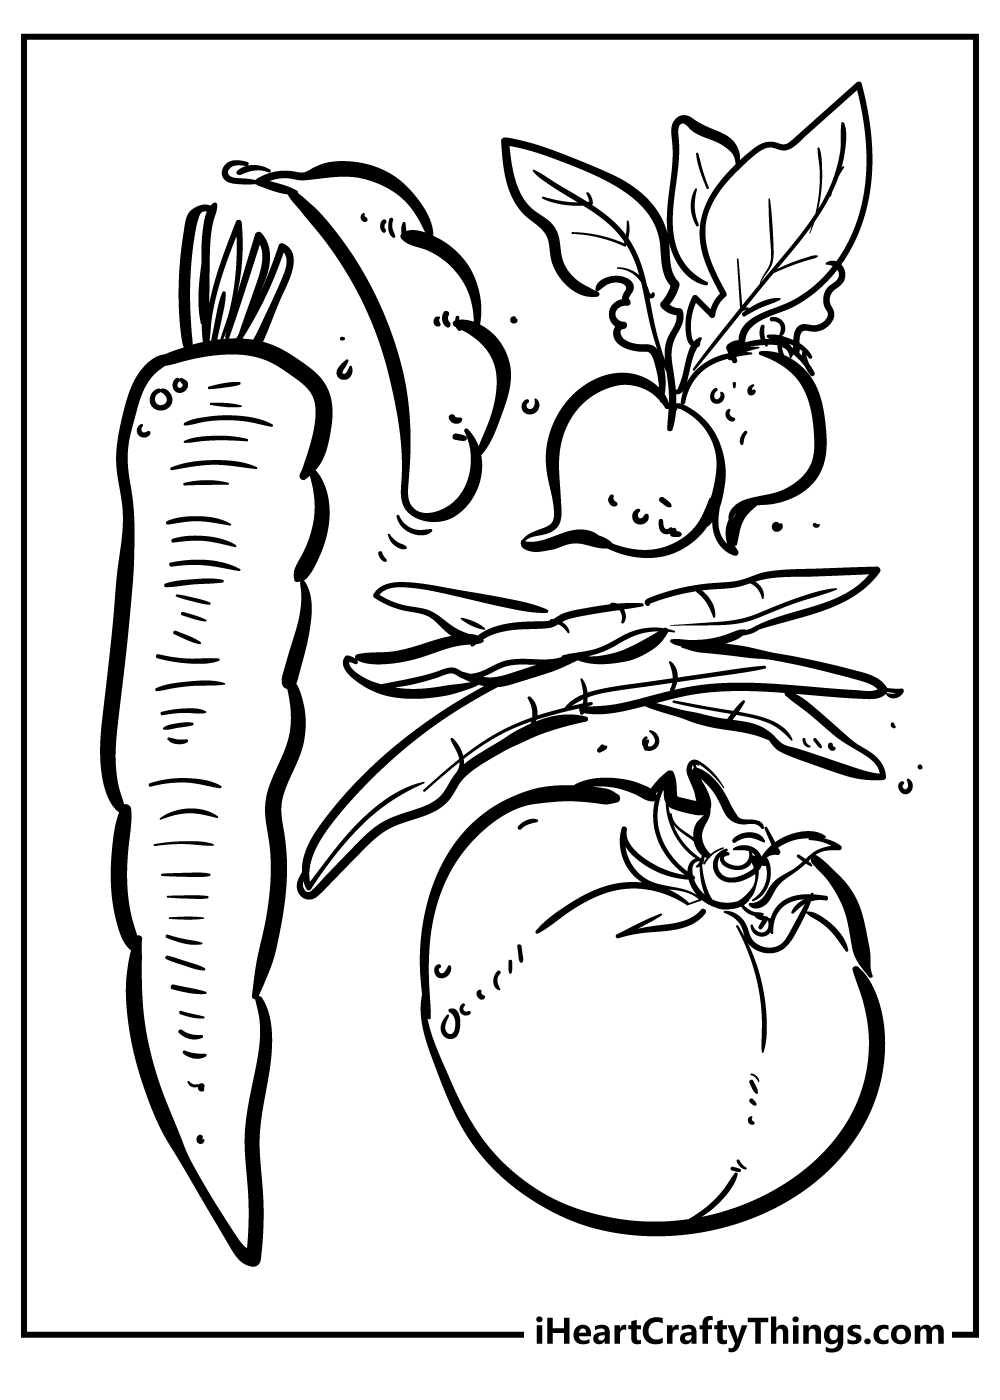 Vegetables Easy Coloring Pages